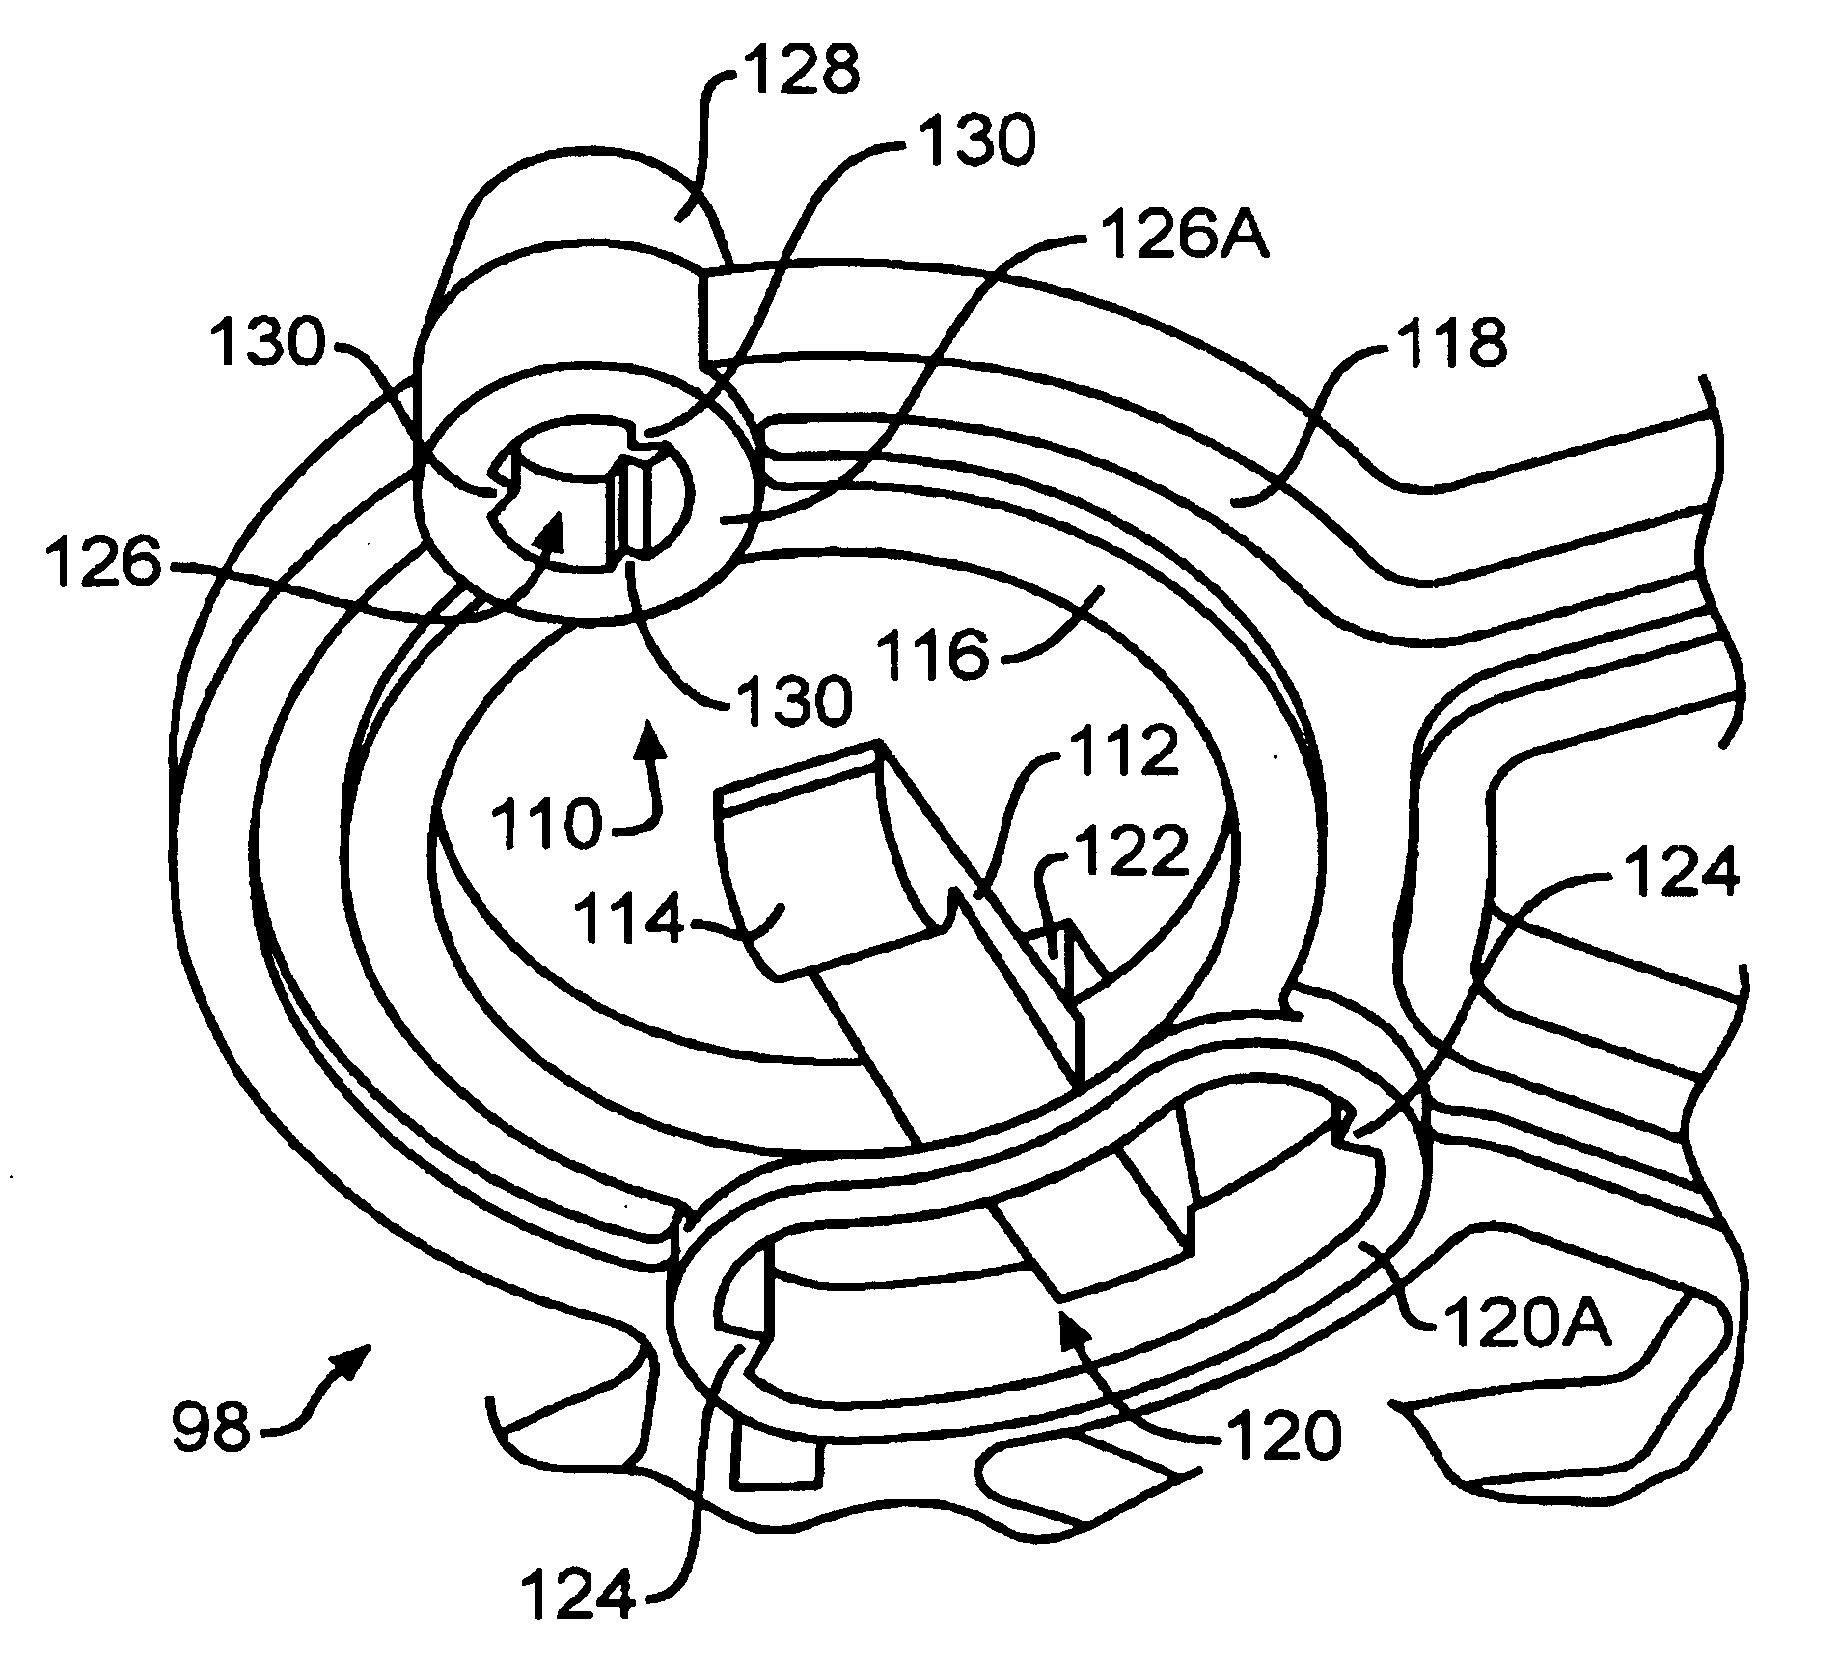 Control unit for vehicle brake system